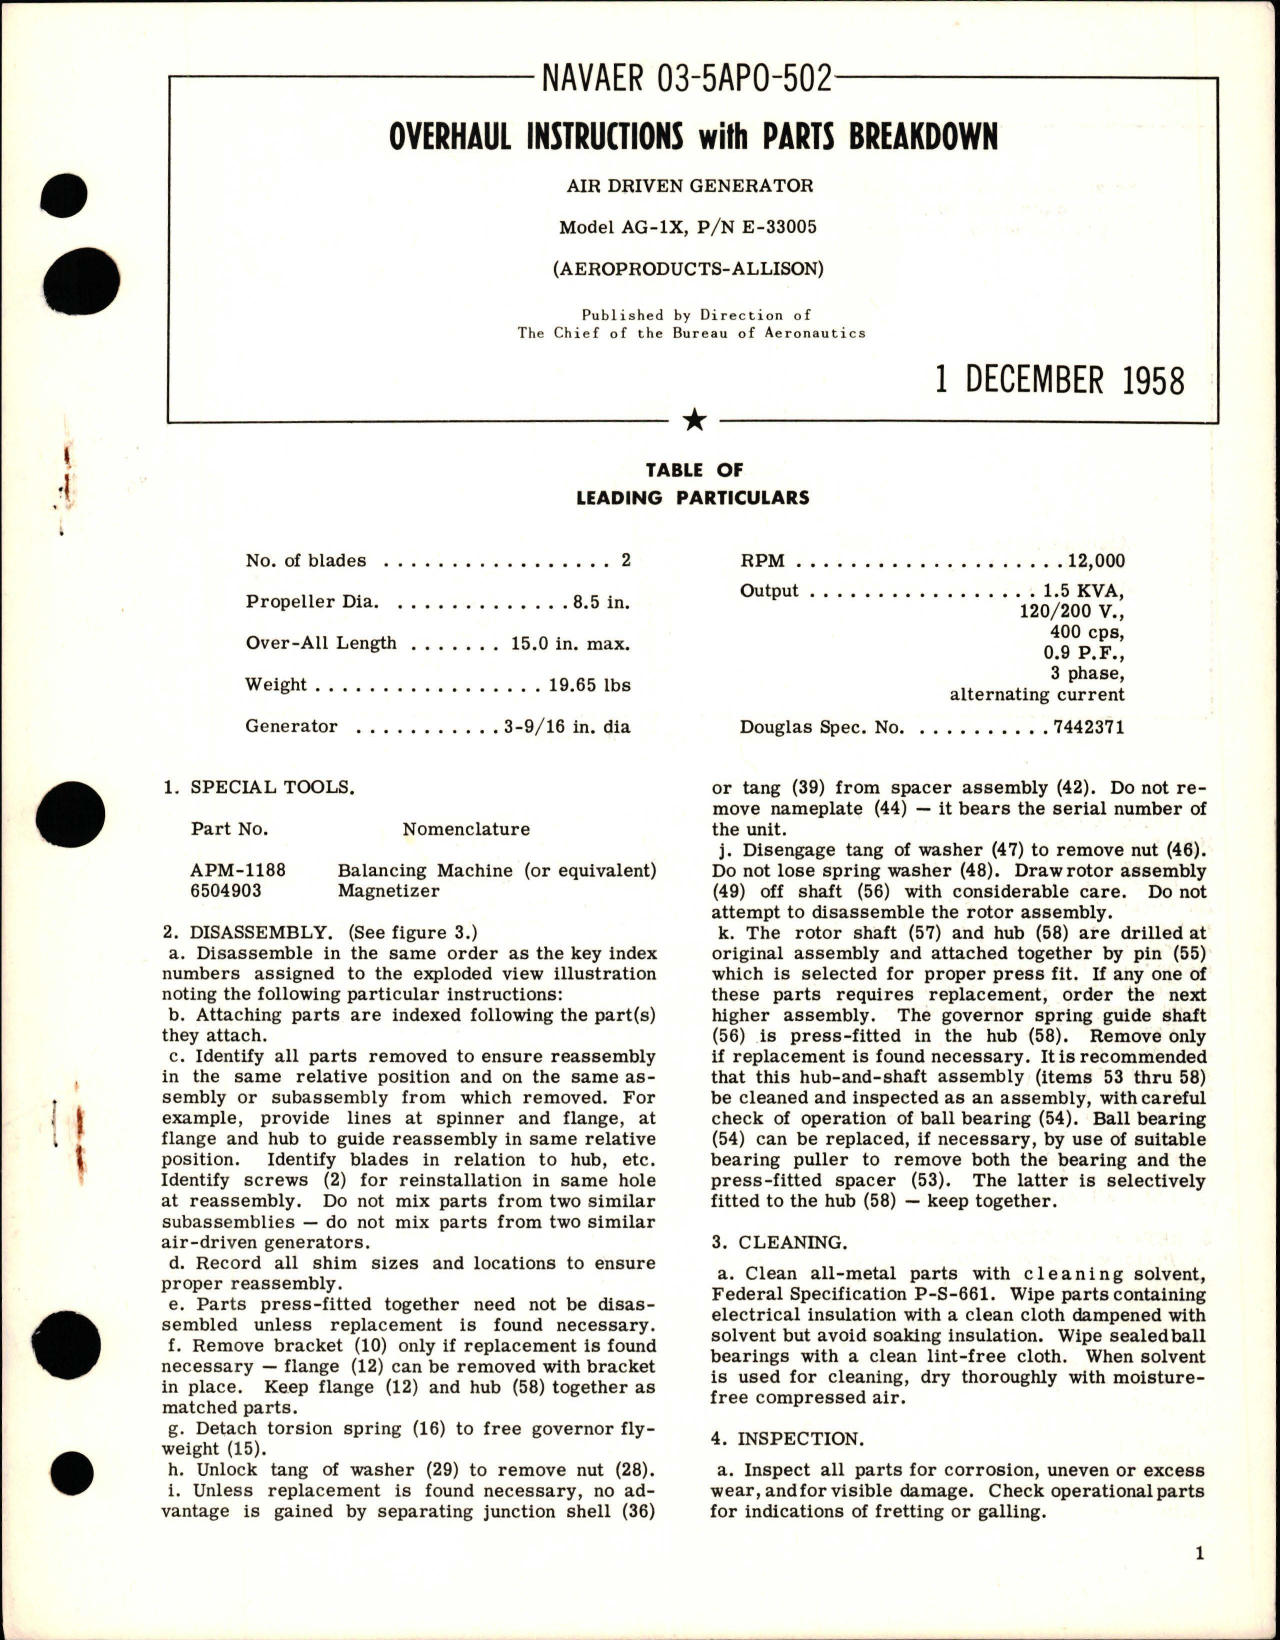 Sample page 1 from AirCorps Library document: Overhaul Instructions w Parts for Air Driven Generator - Model AG-1X